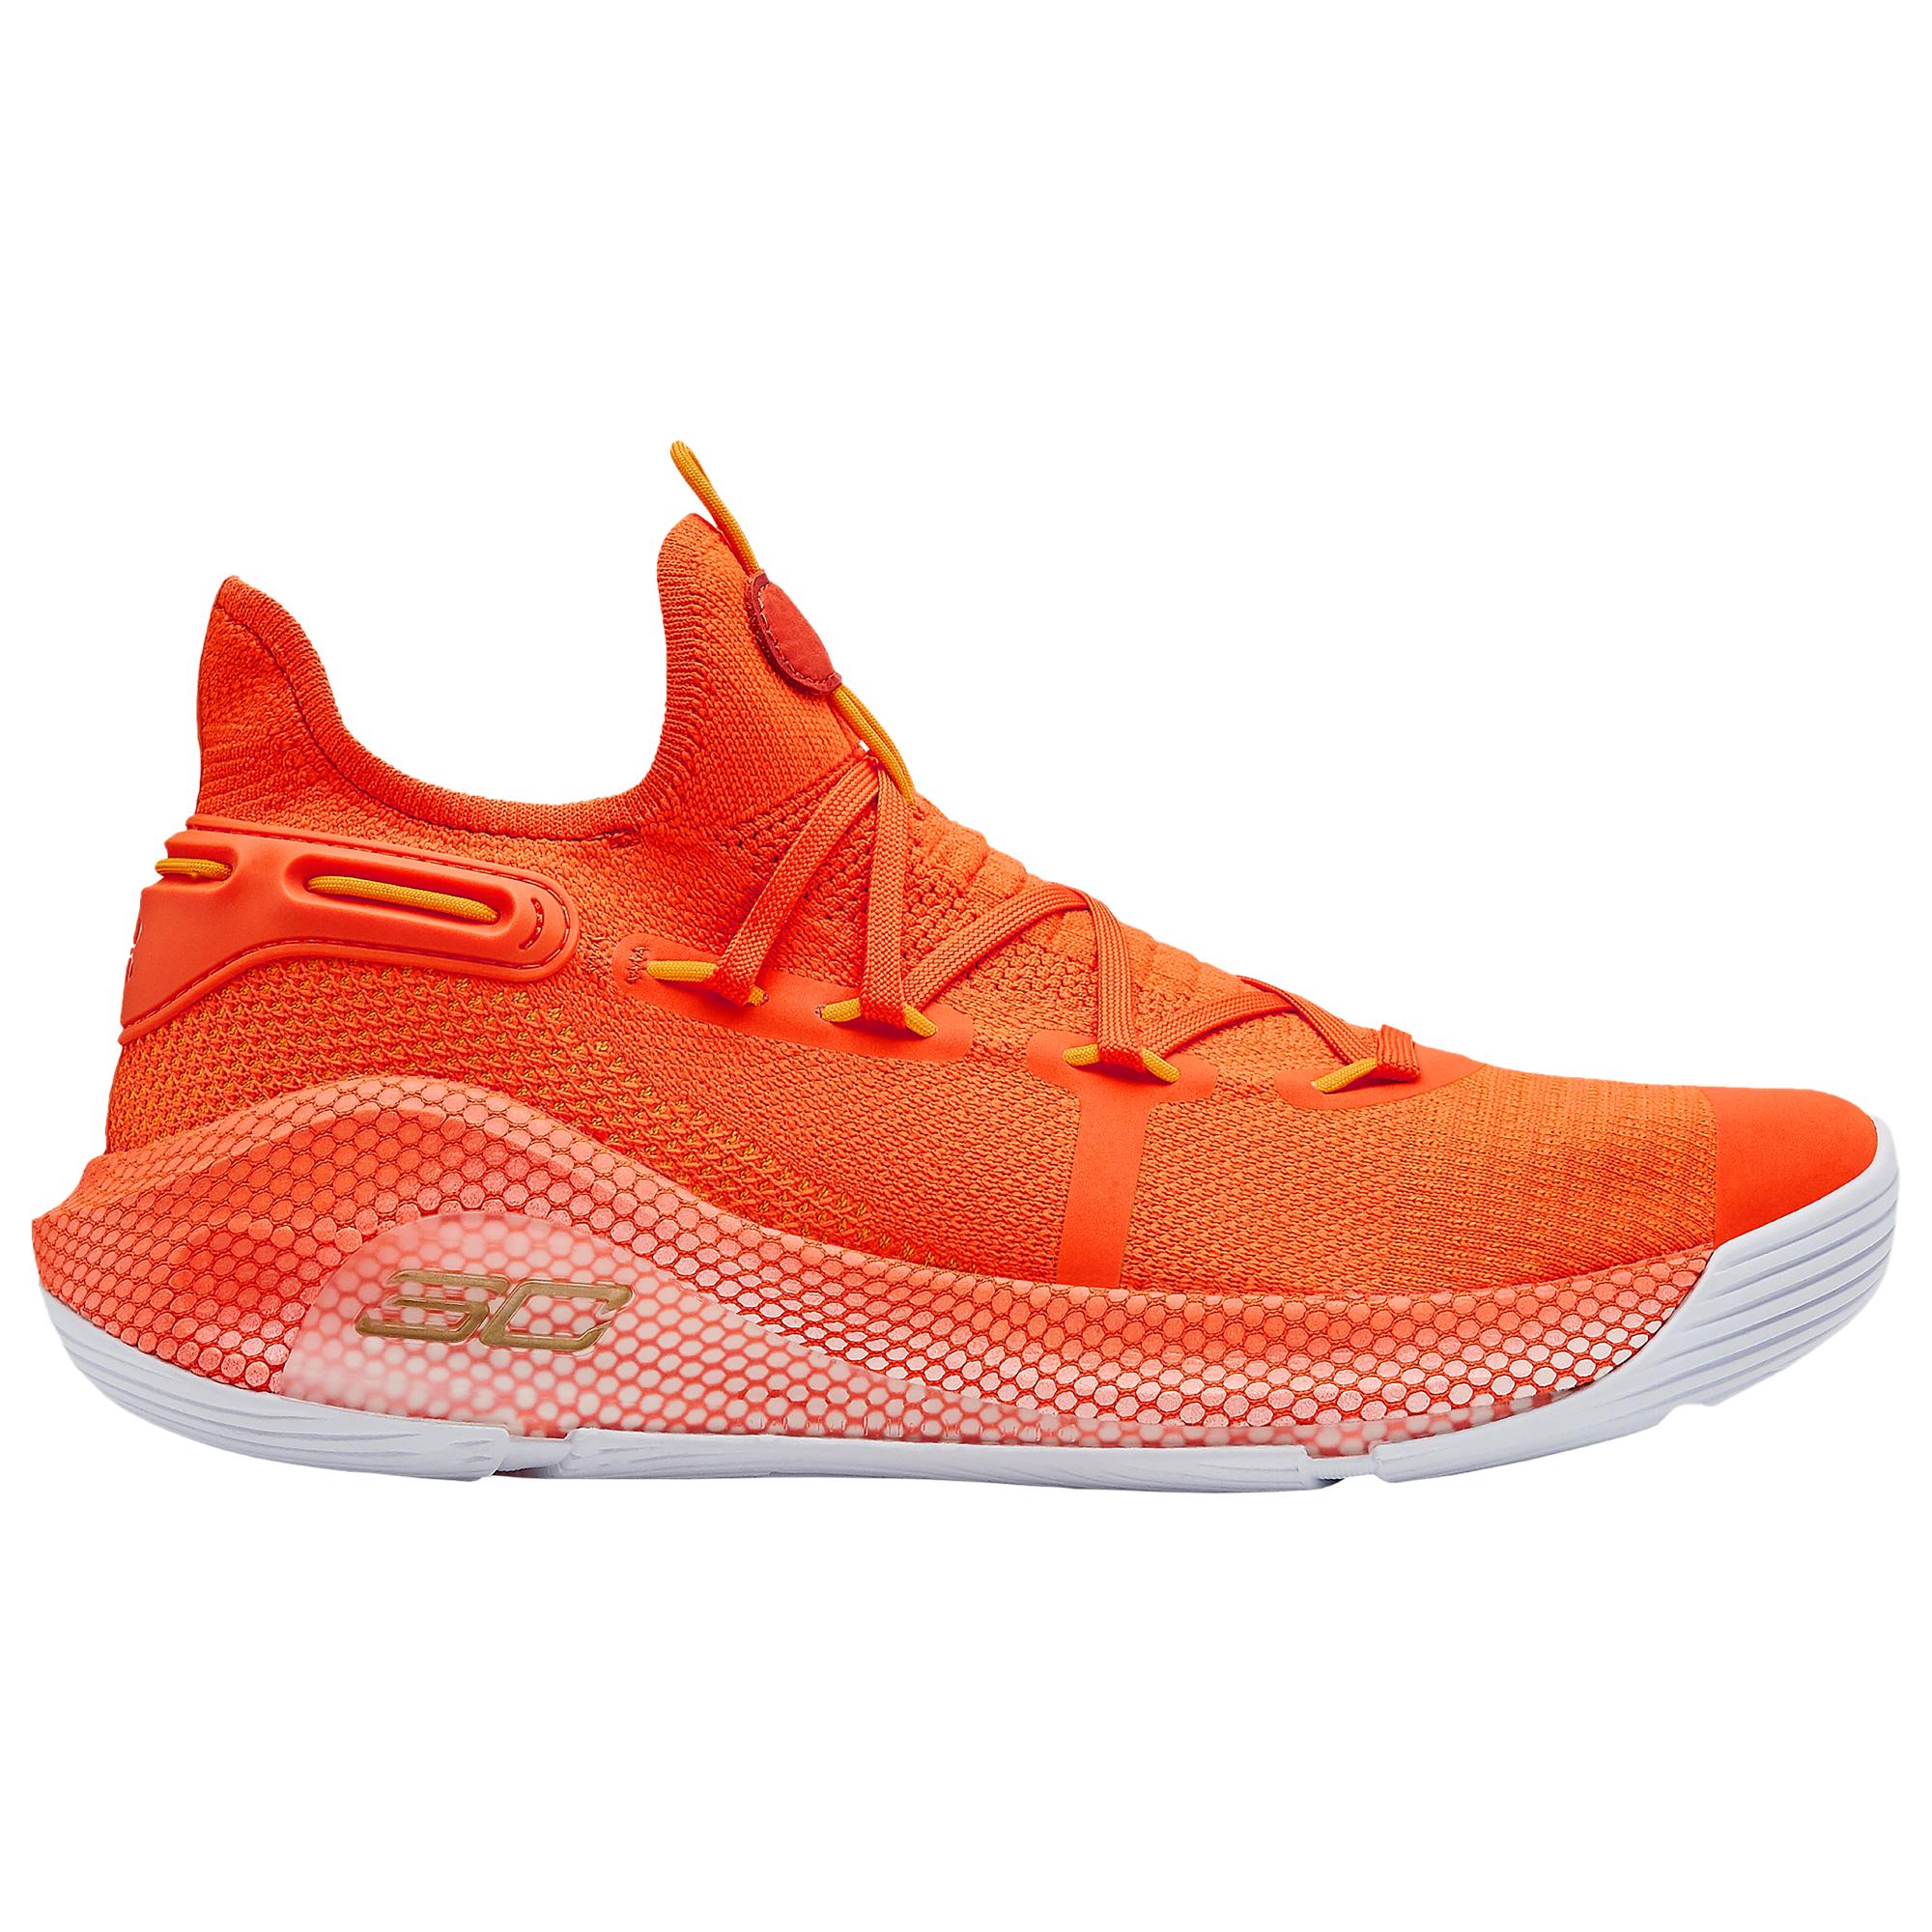 Under Armour Rubber Curry 6 Basketball 